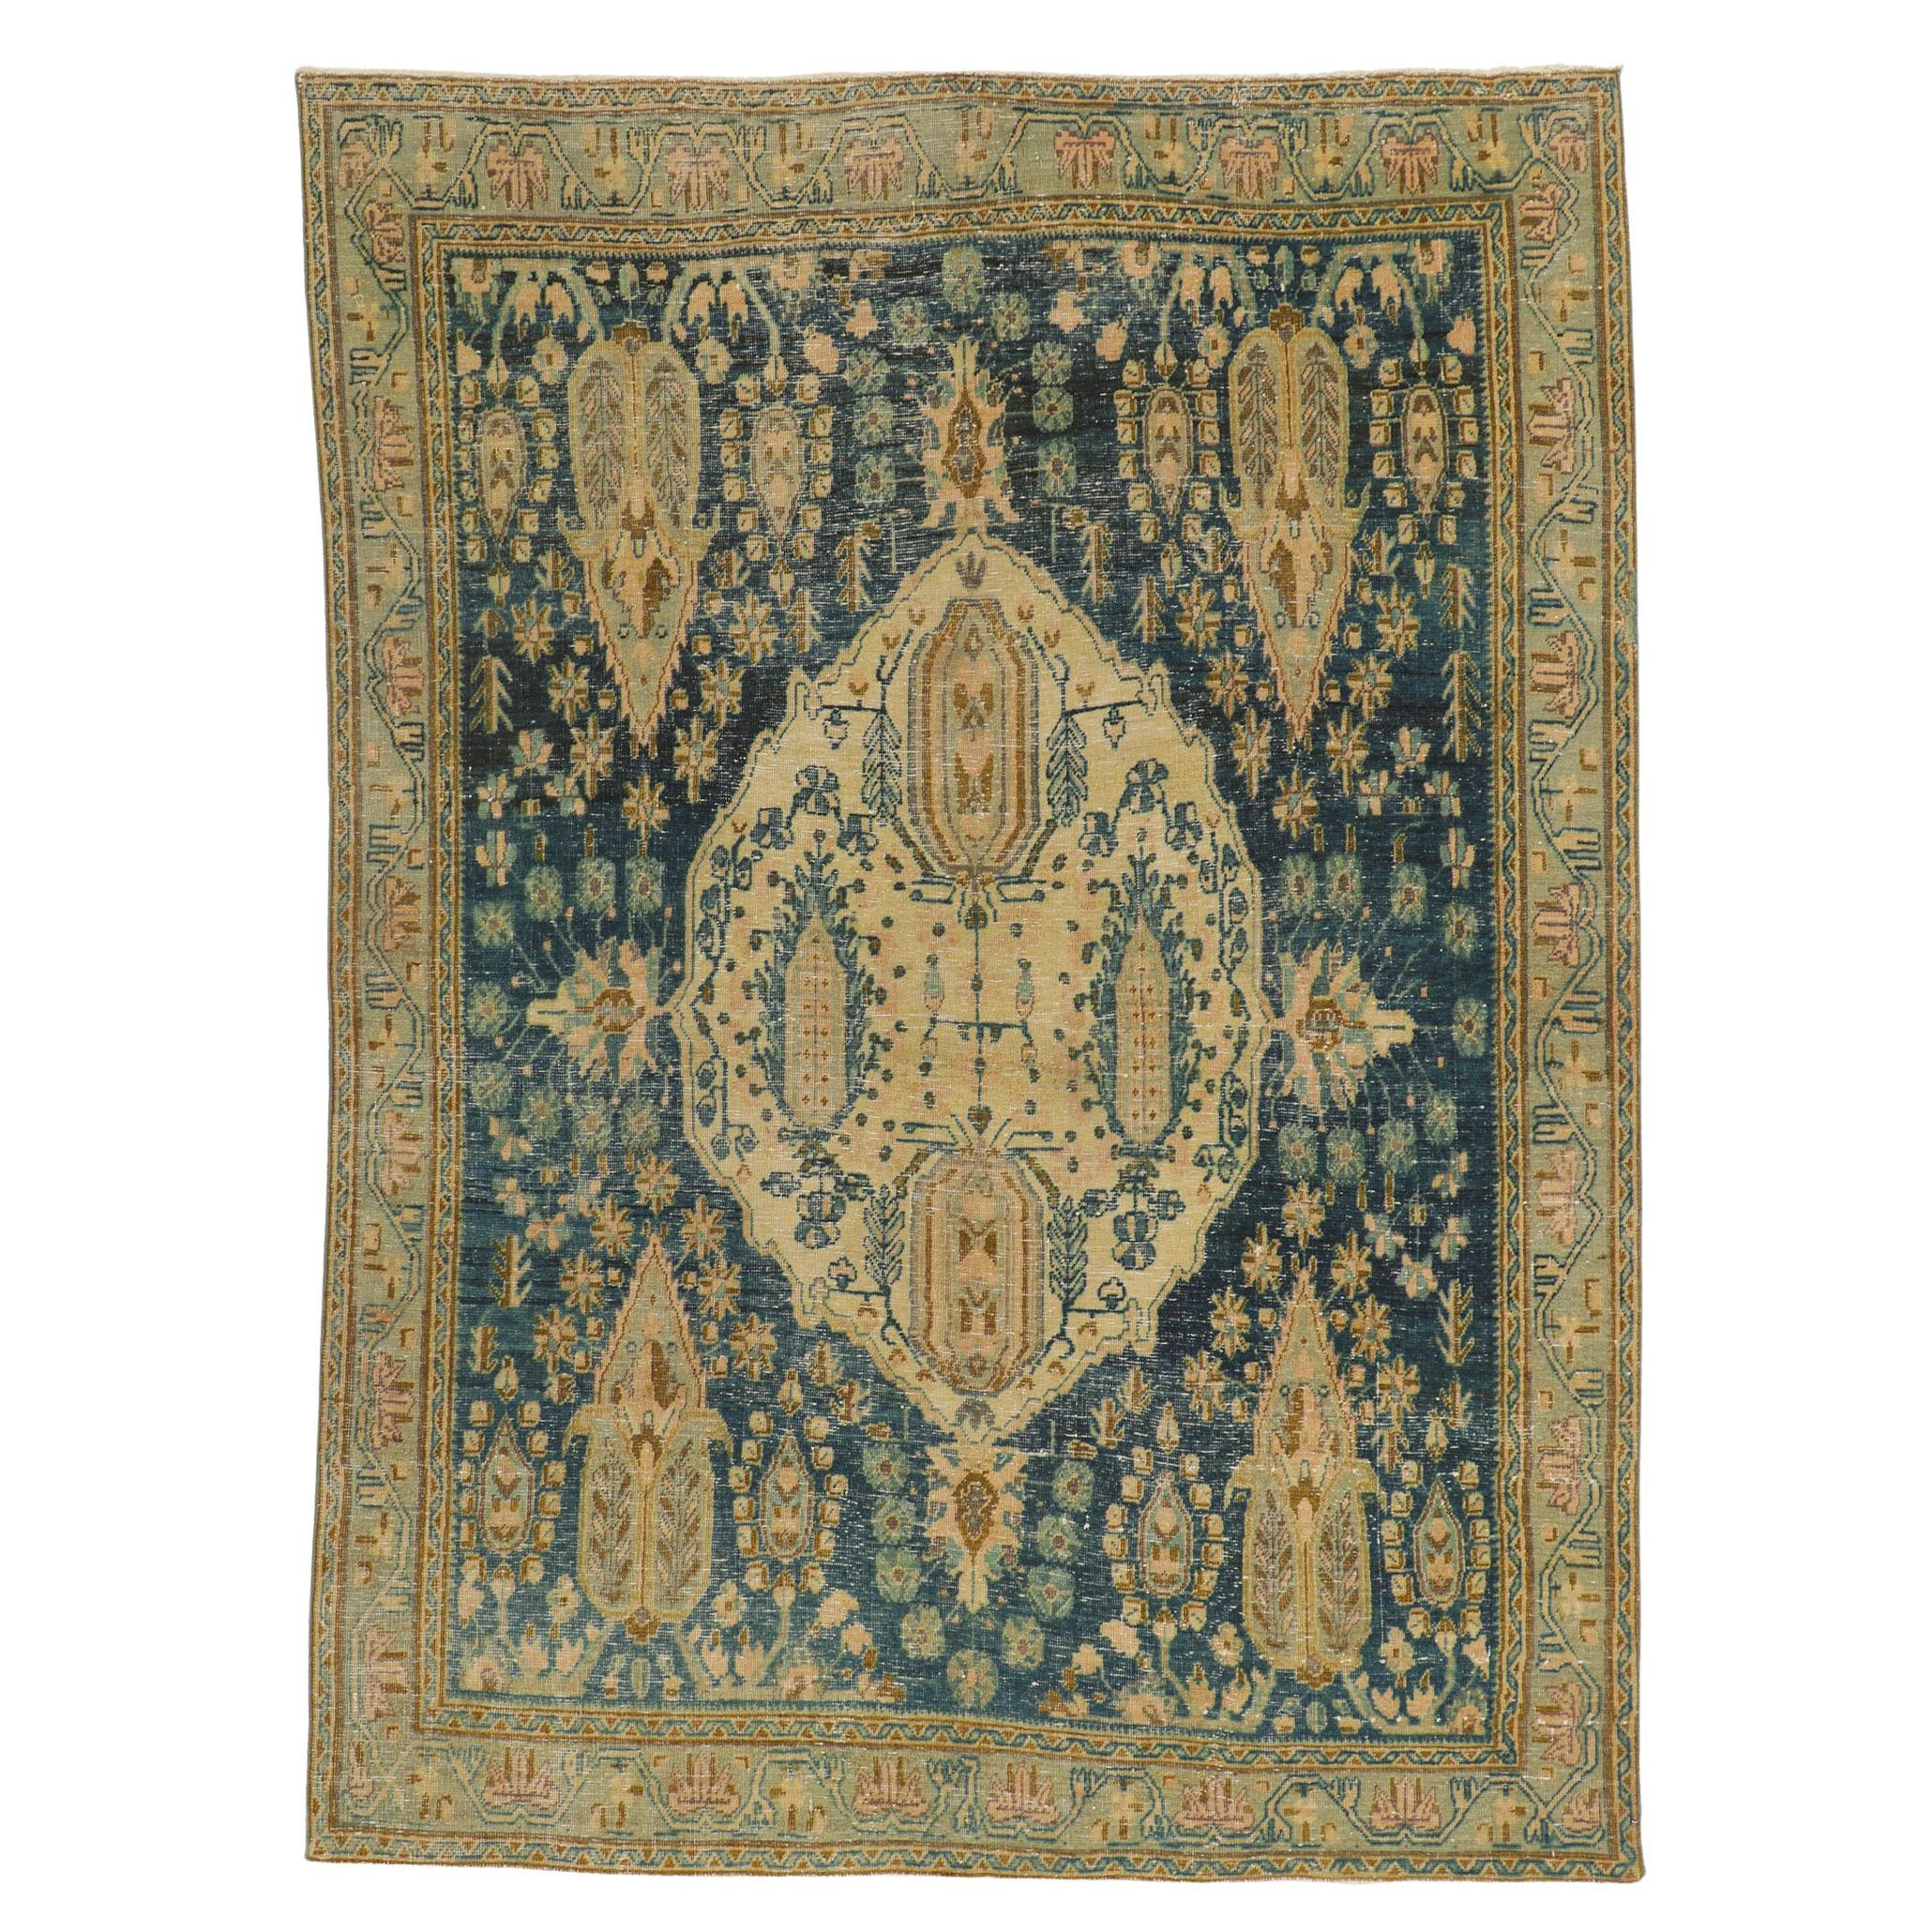 Rustic Earth-Tone Vintage Persian Afshar Rug with Cypress Trees